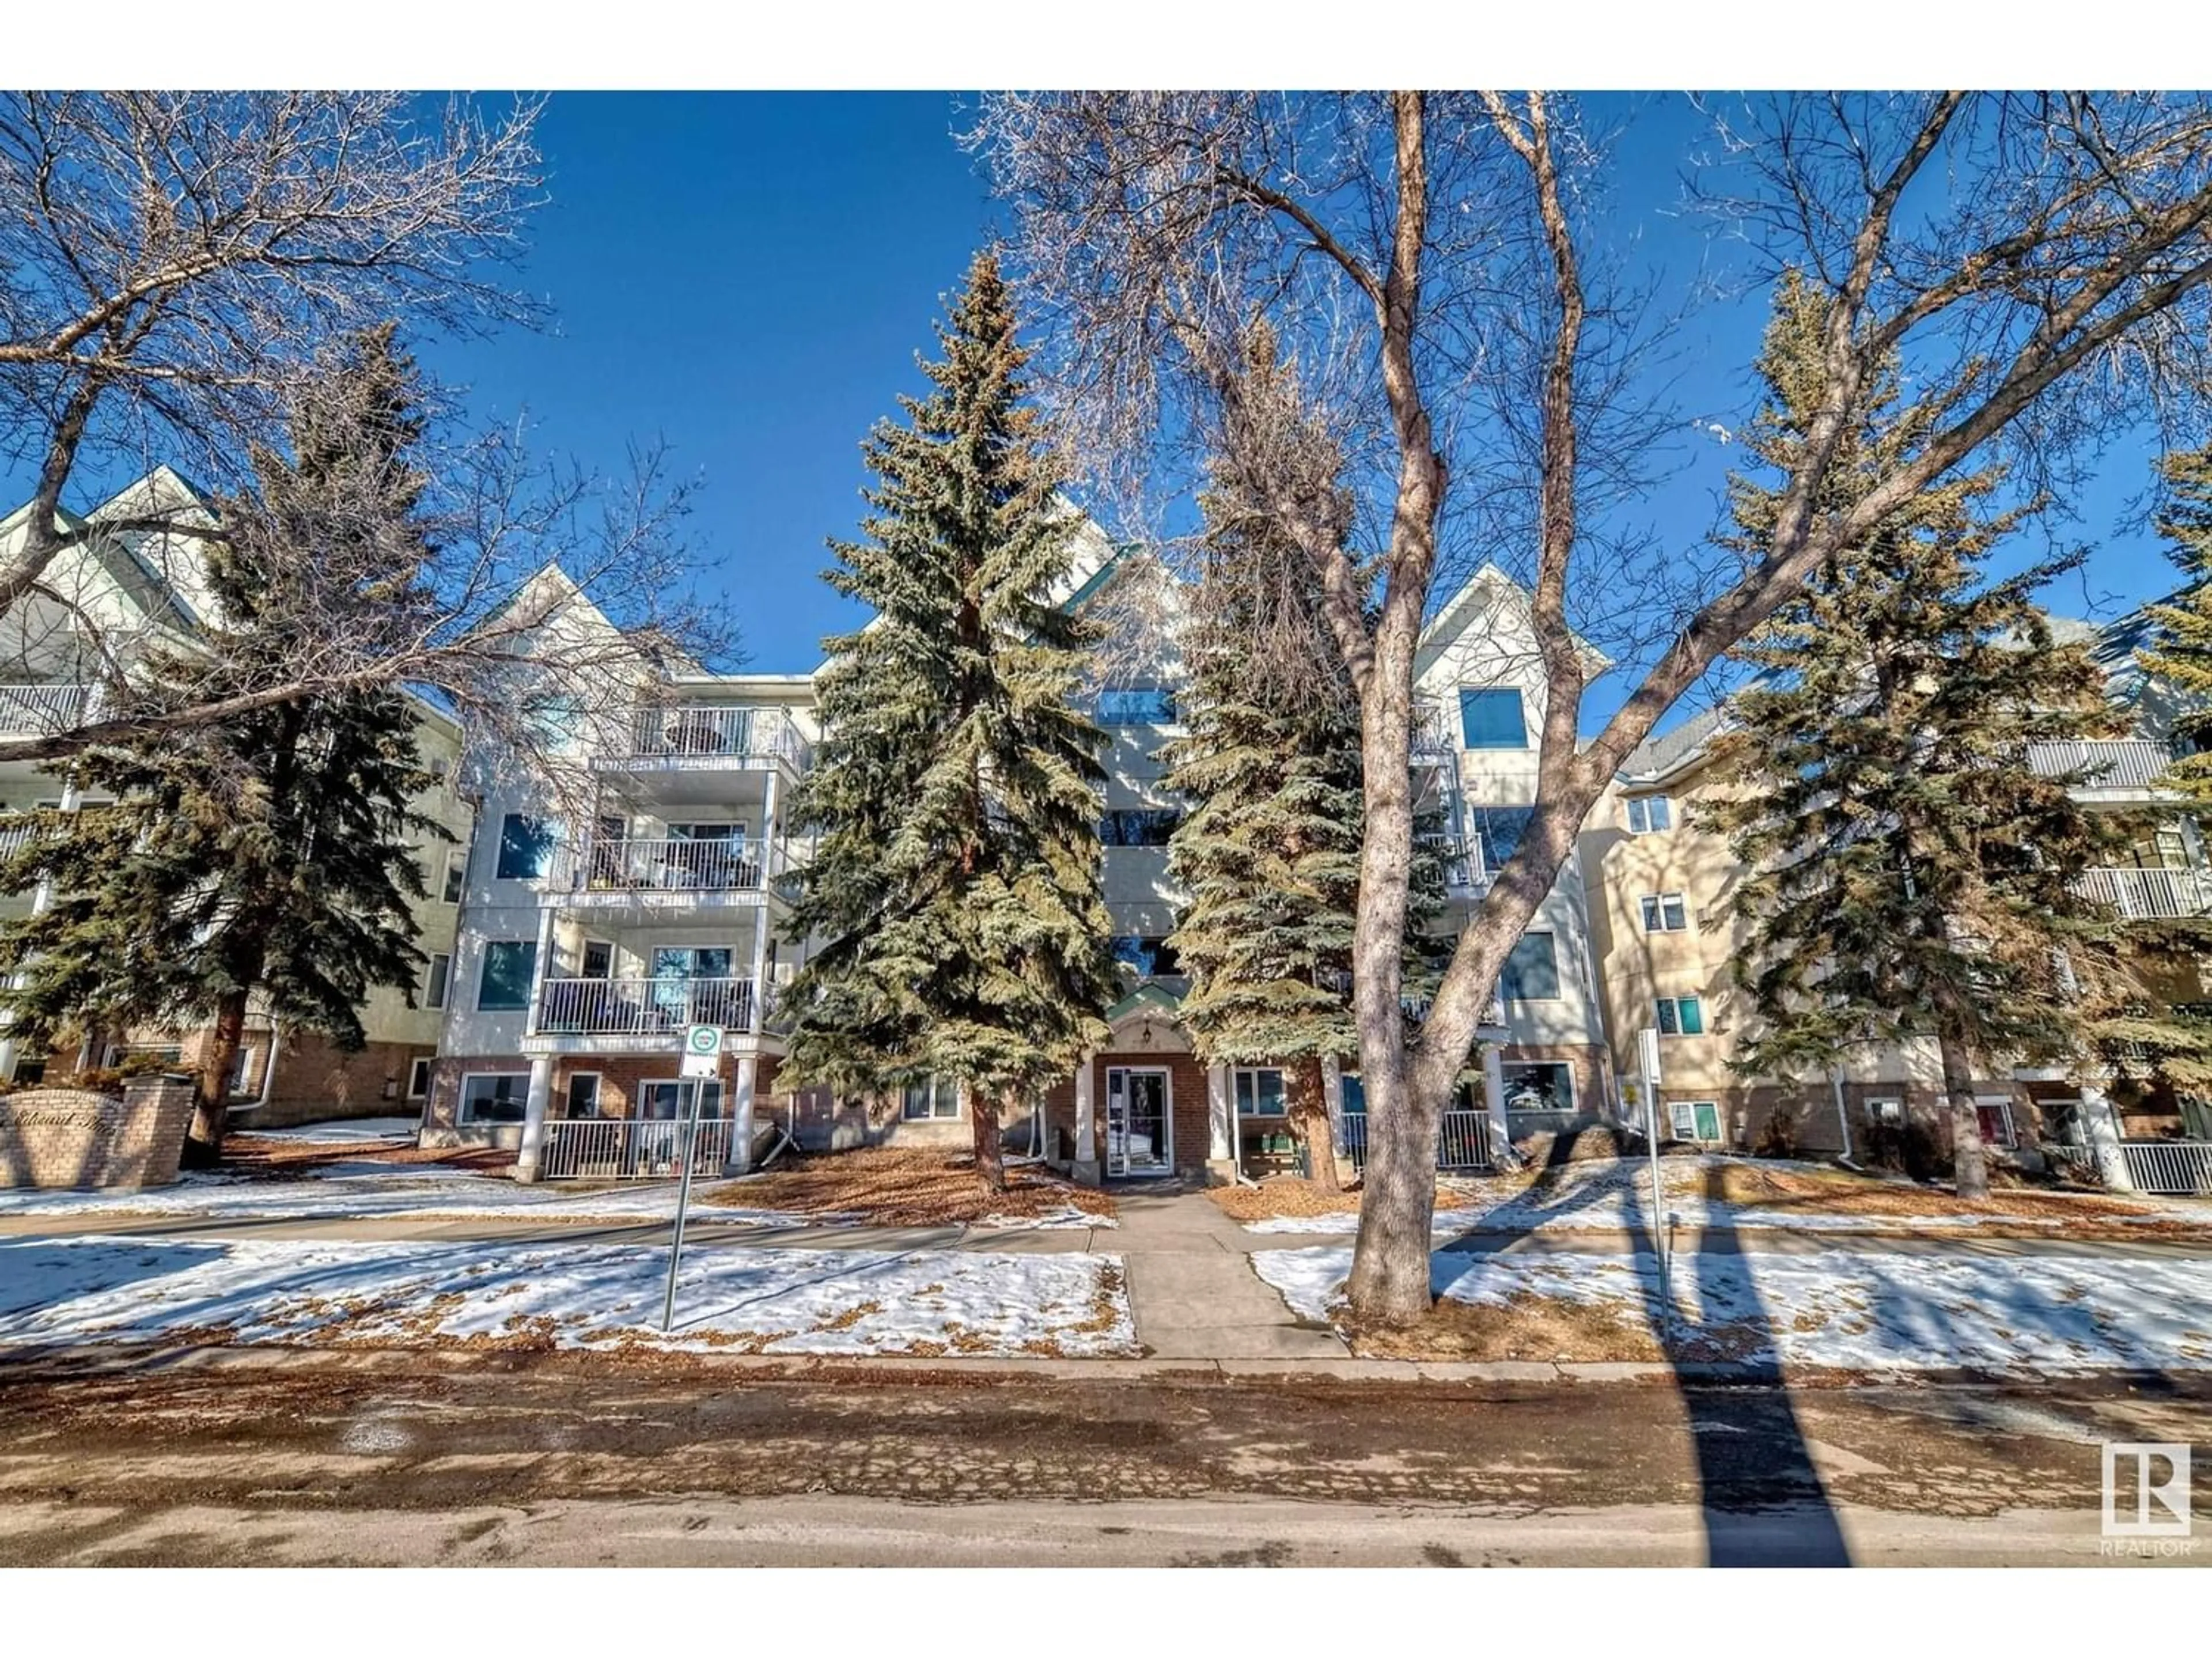 A pic from exterior of the house or condo for #32 9914 80 AV NW, Edmonton Alberta T6E6L6